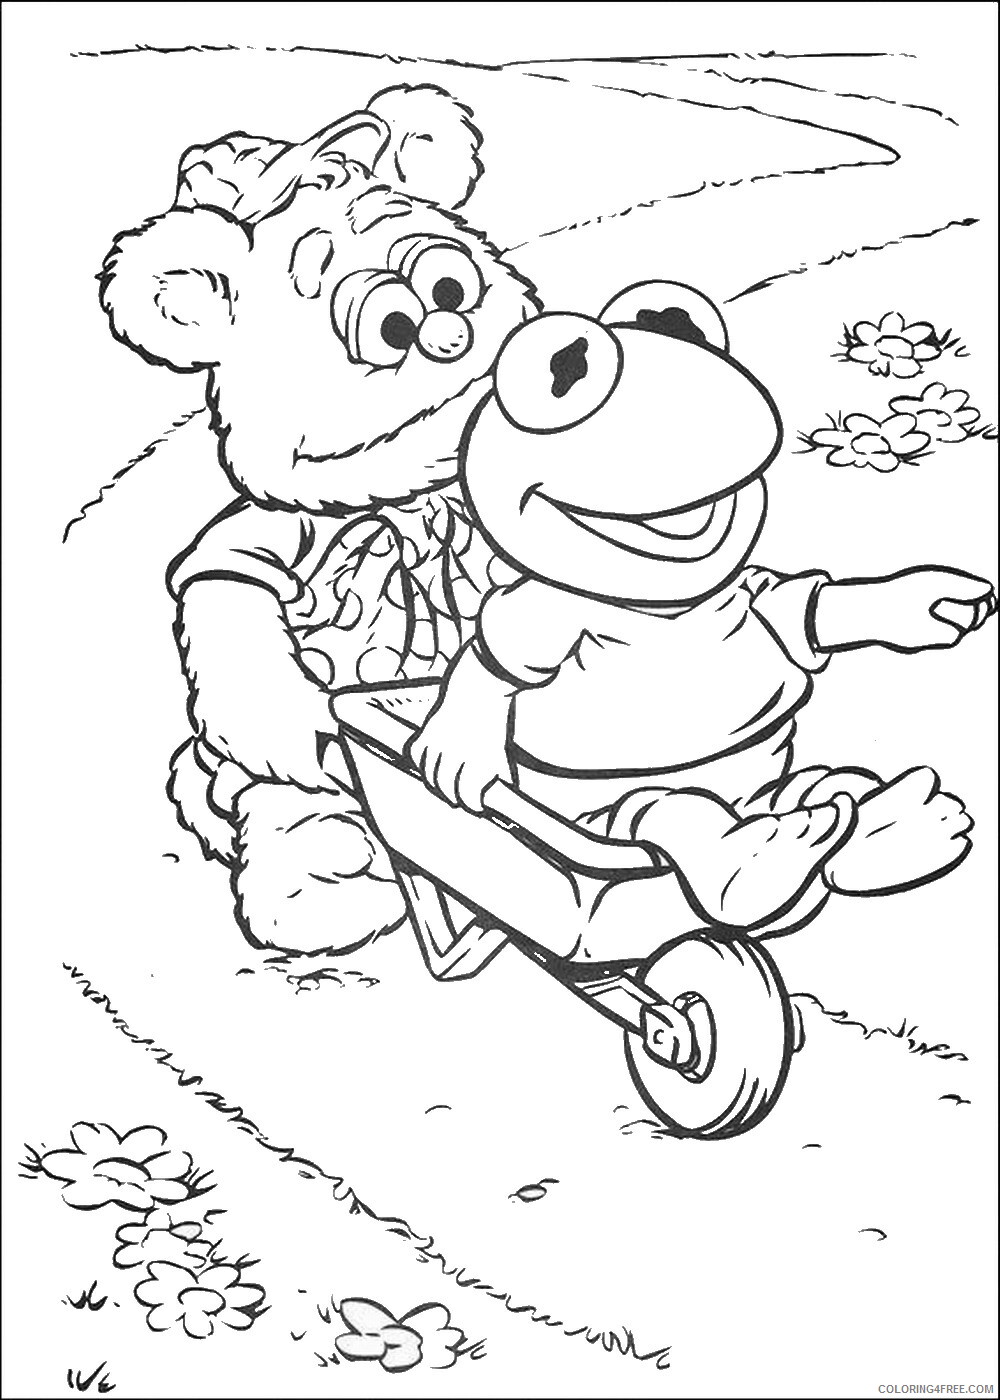 The Muppet Show Coloring Pages TV Film muppets_cl_15 Printable 2020 09374 Coloring4free